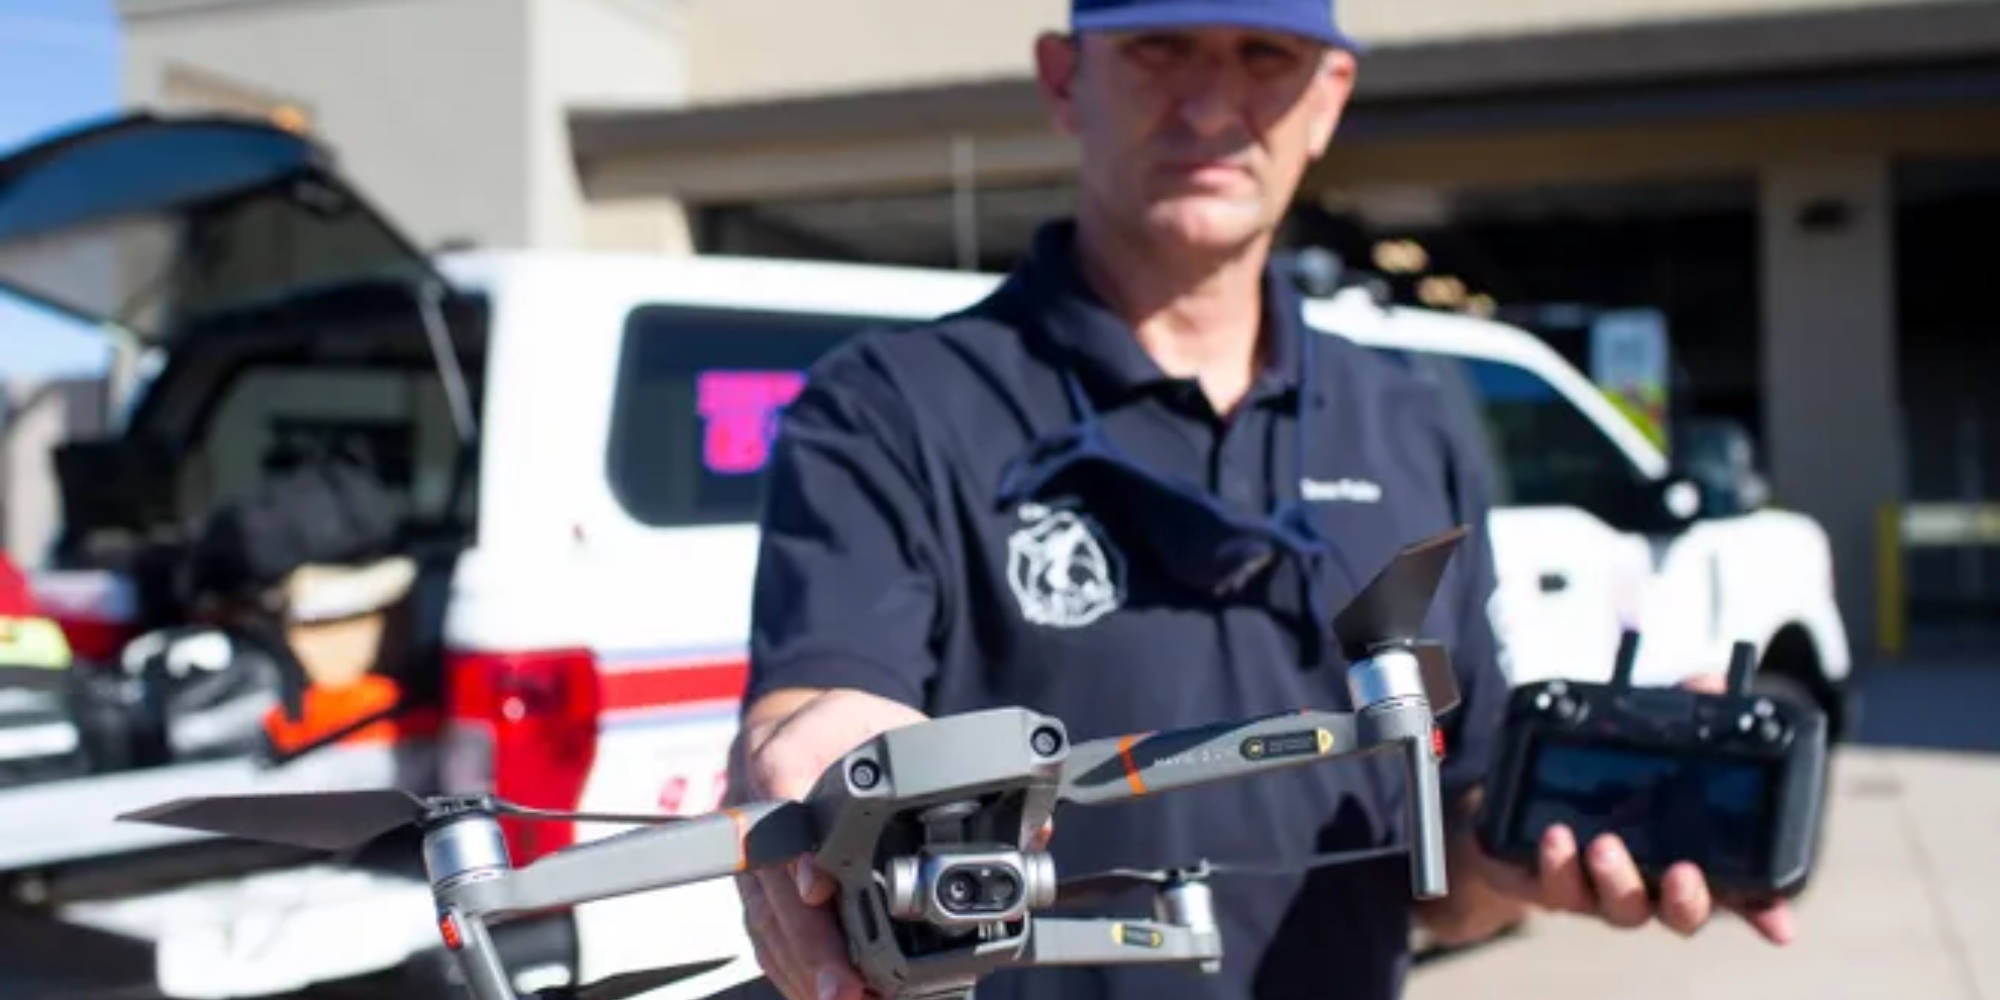 Scottsdale Fire Department using drones to improve safety DroneDJ